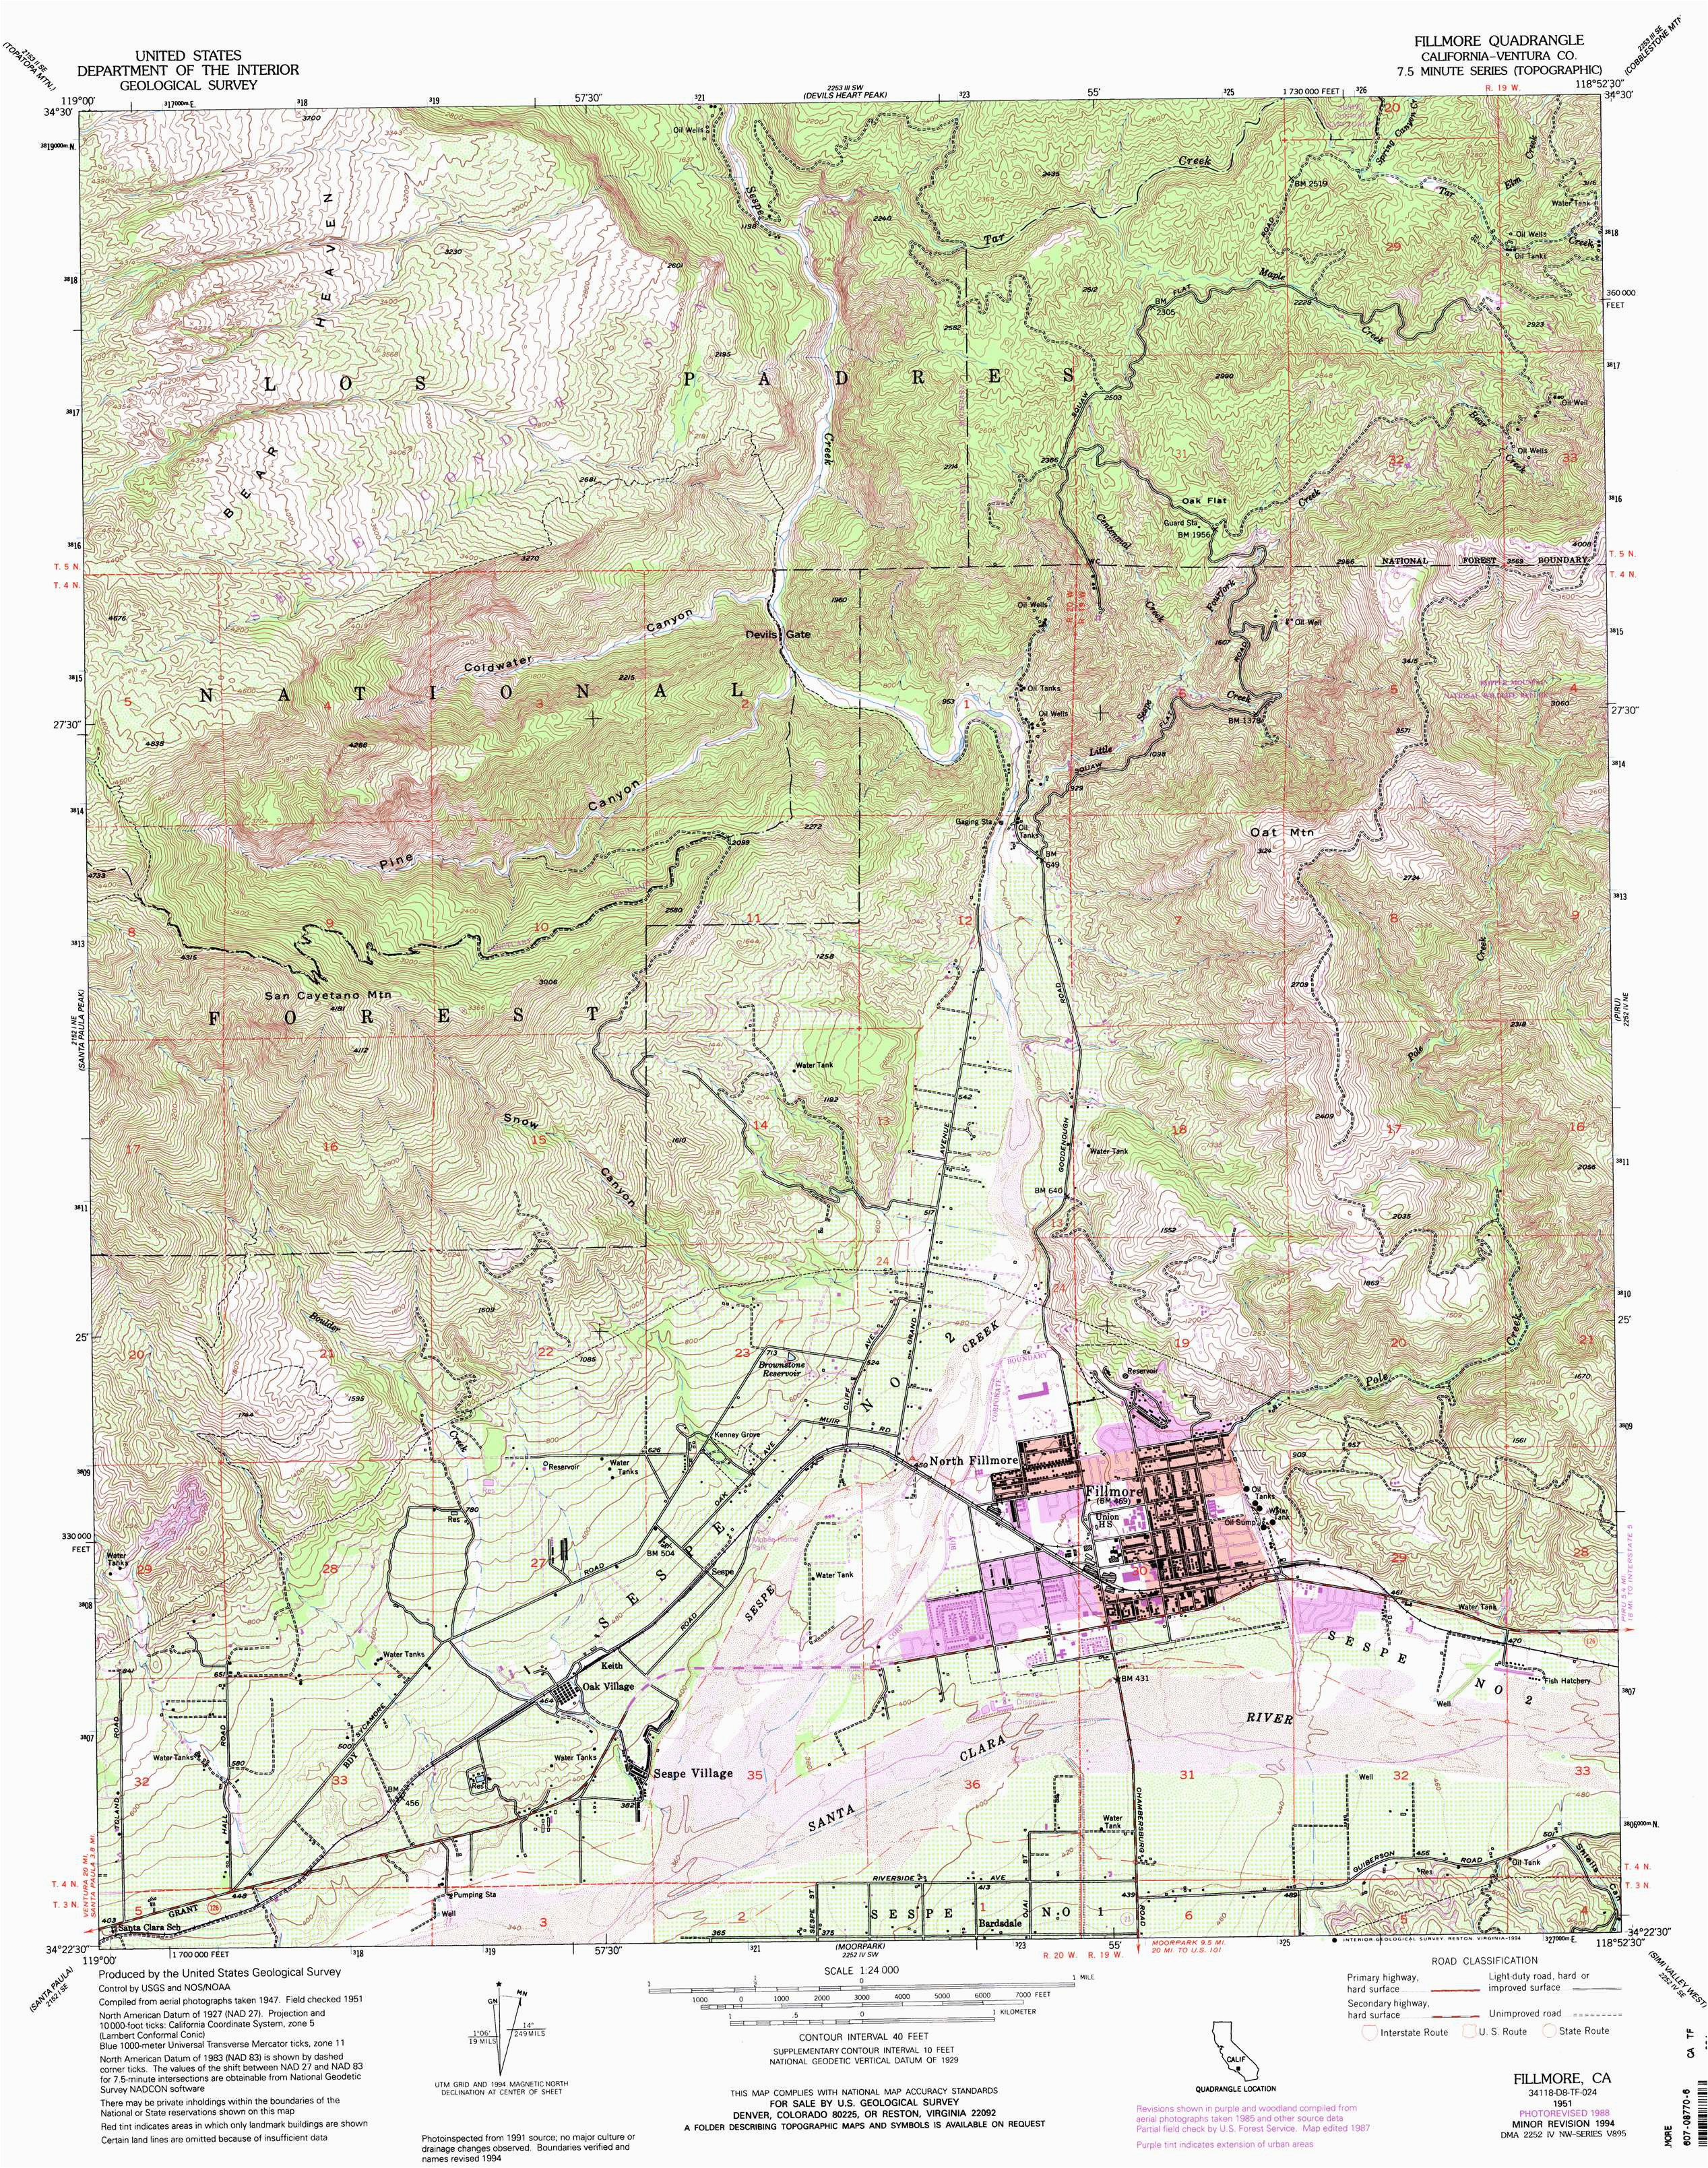 Map Of Redwood forests In California Od Gallery Website Fillmore California Map California Map